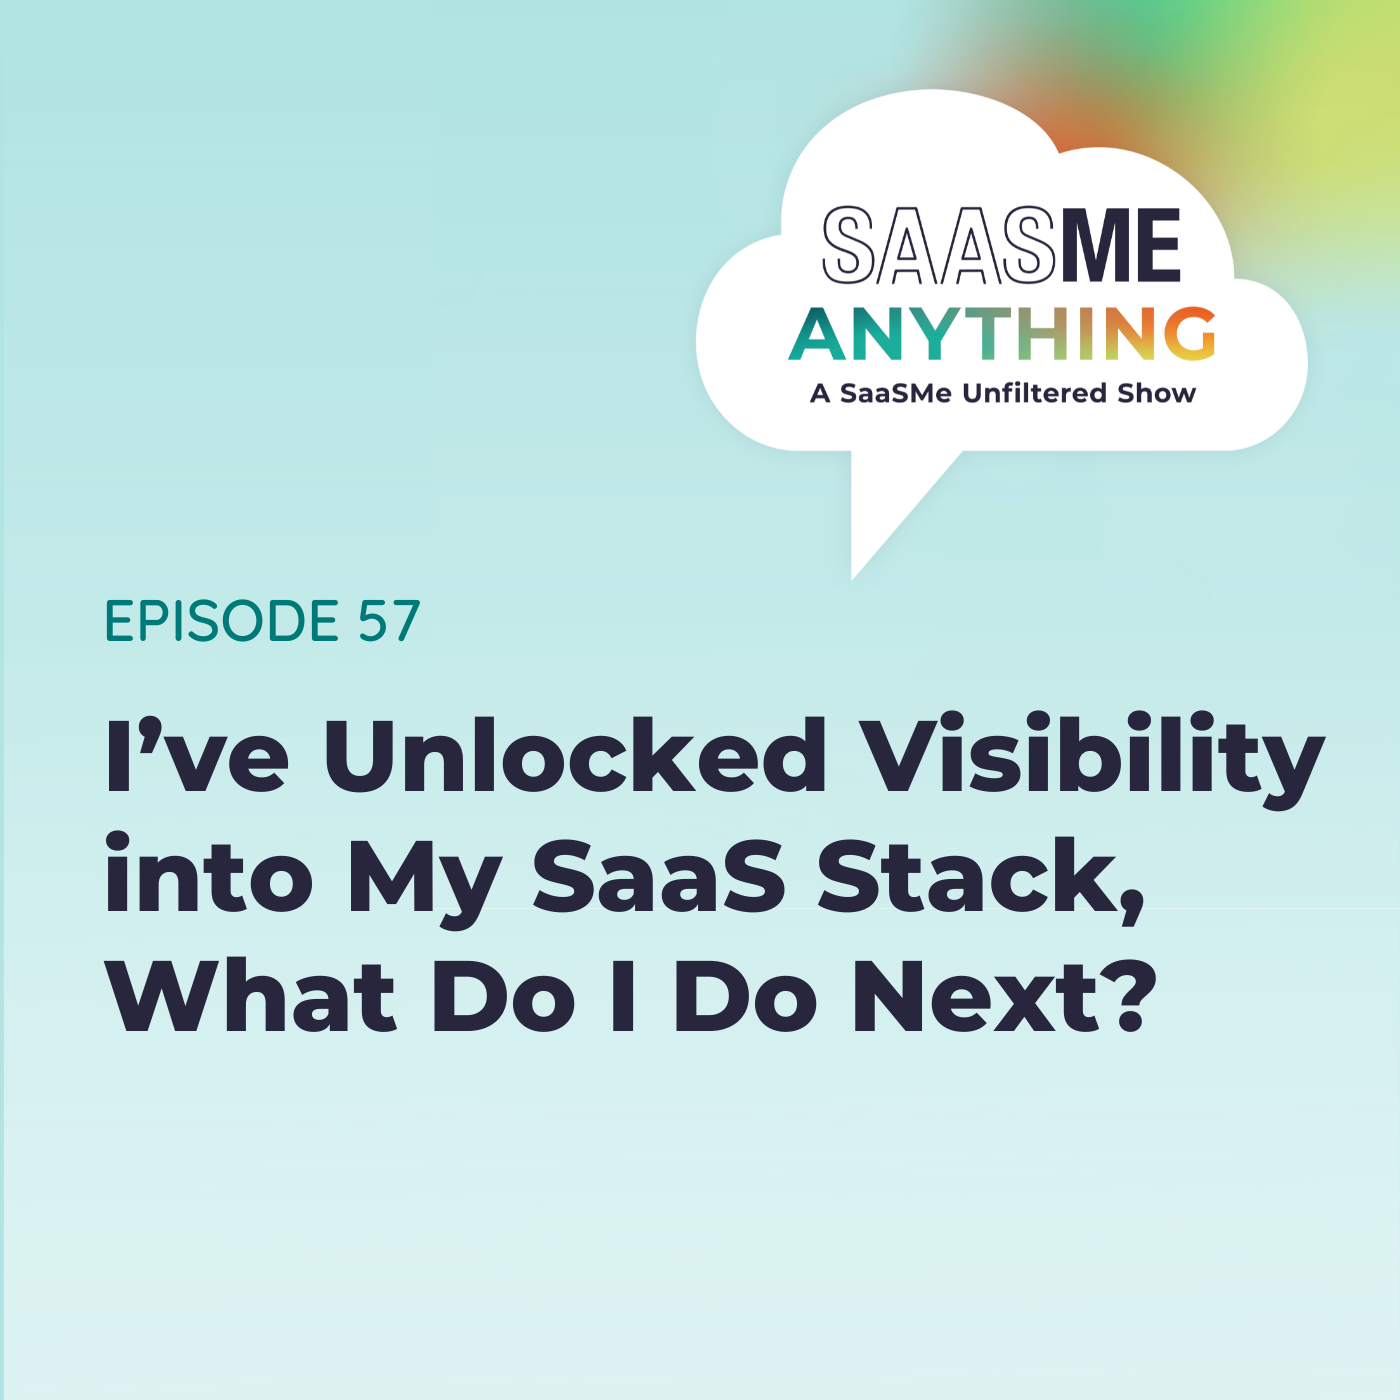 I’ve Unlocked Visibility into My SaaS Stack, What Do I Do Next?